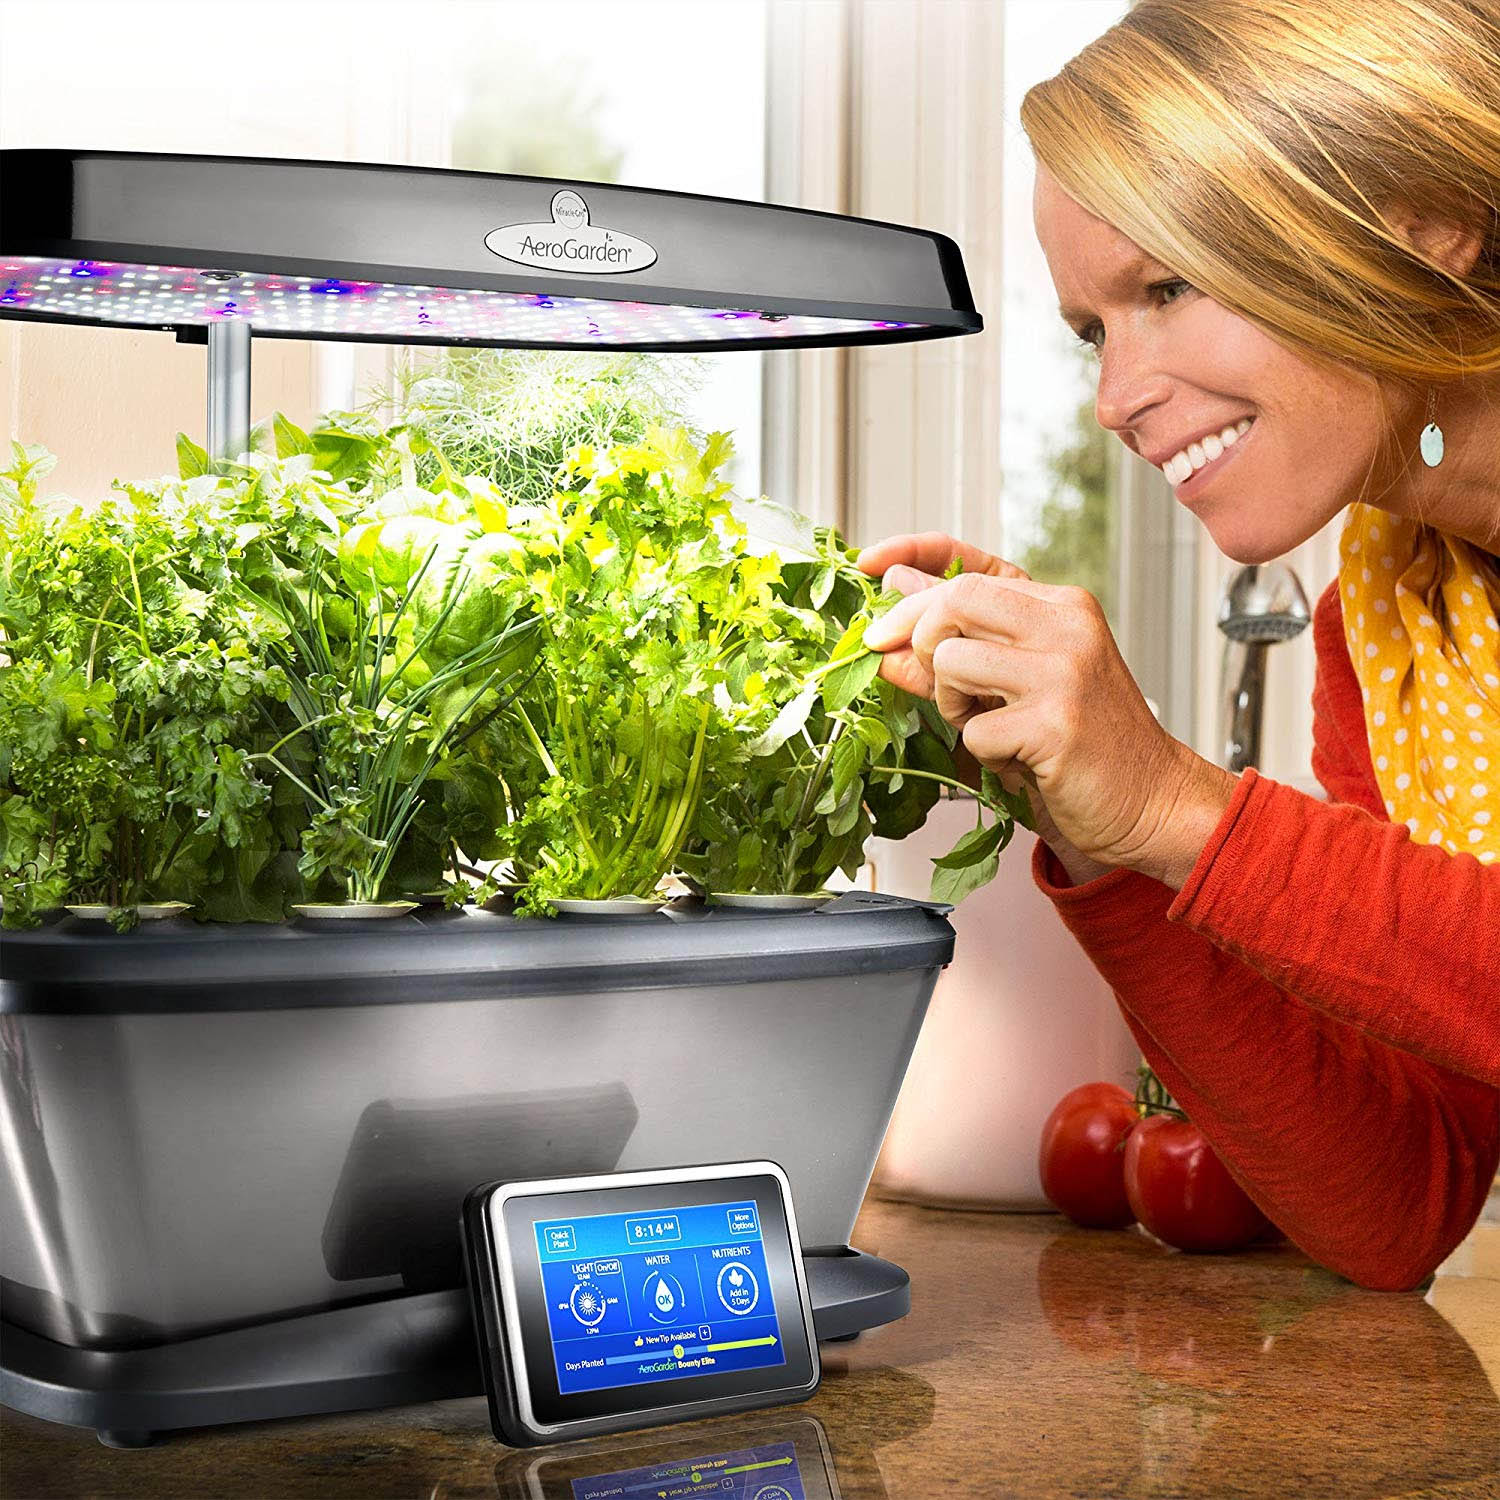 AeroGarden Bounty Elite with Gourmet Herb Seed Pod Kit lets you keep gardening no matter how dreary and depressed the outside world gets.<br><br>Brighten up your home <a href="https://amzn.to/2CFkvwL" target="_blank" "nofollow">here</a>.